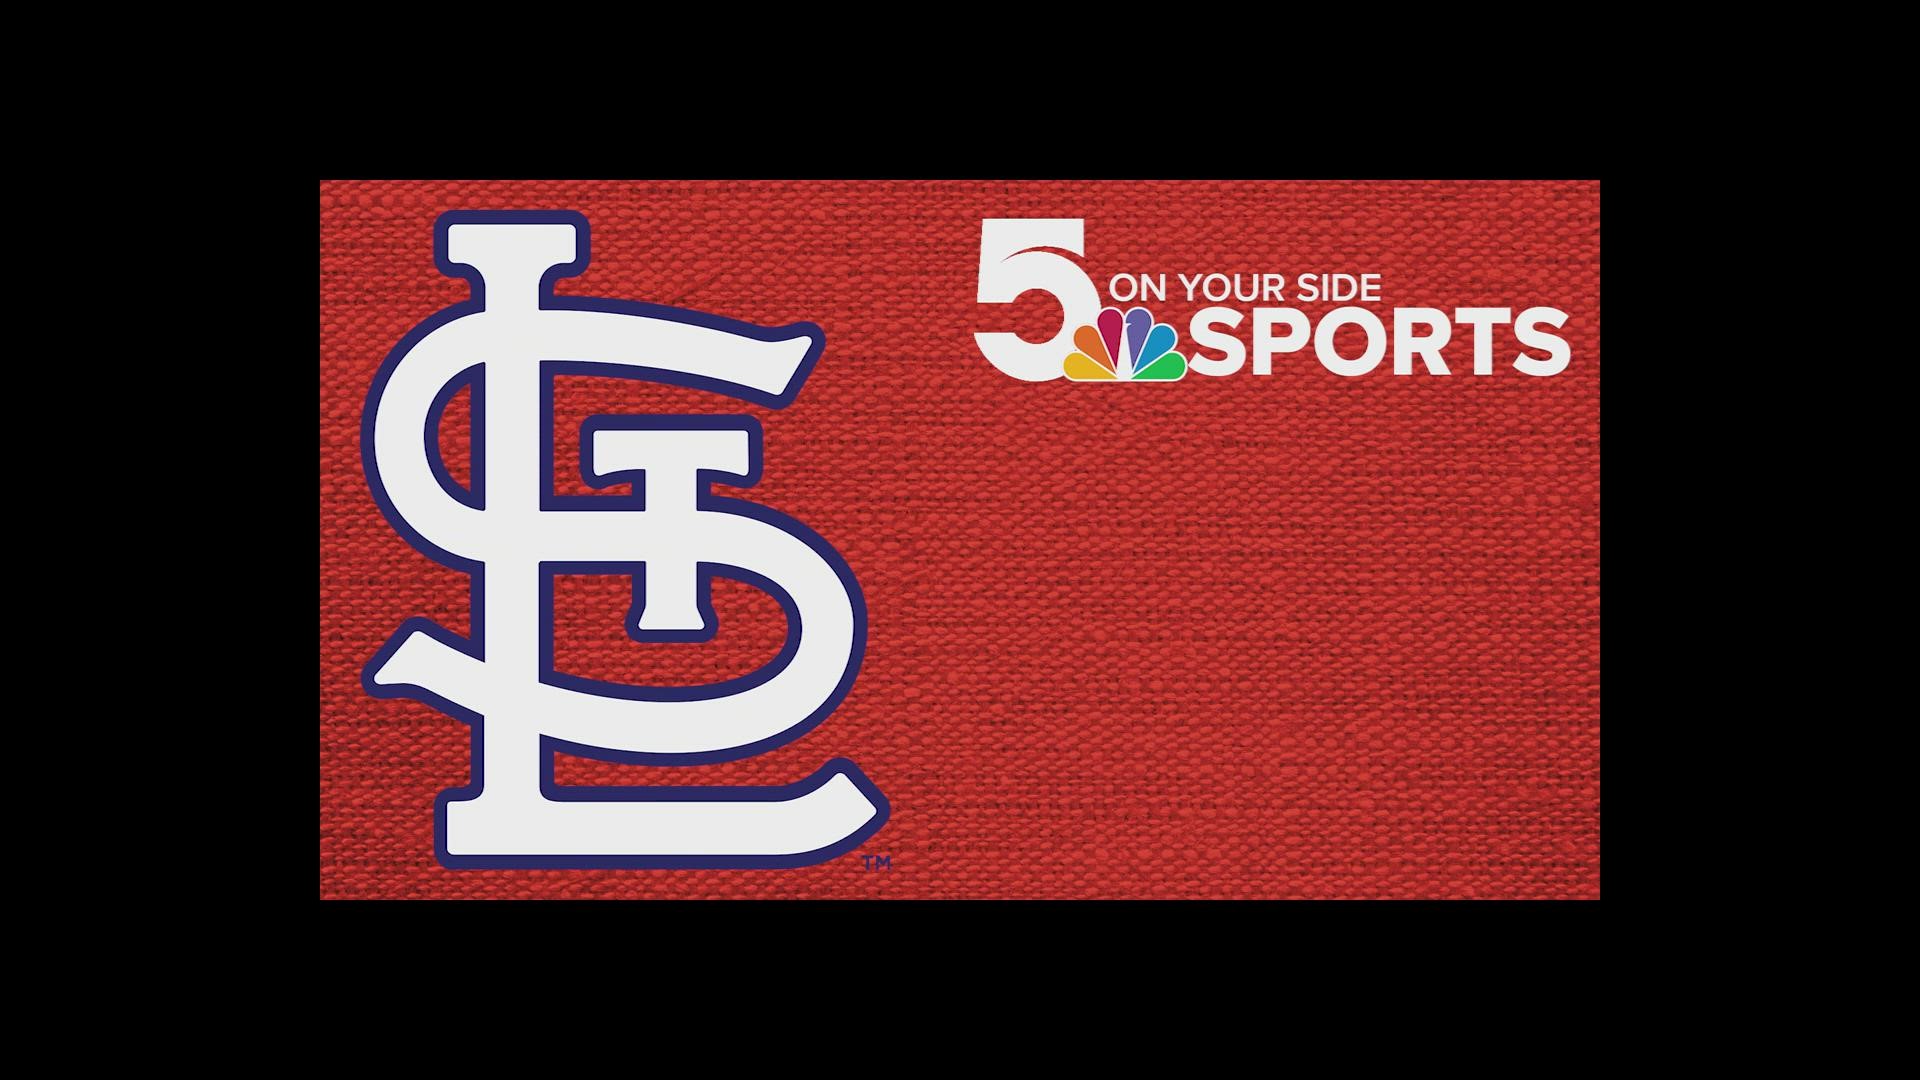 In this second episode of Cardinals Plus, Ahmad and Corey talk about most impressive spring training performers, Jordan Hicks' epic 22-pitch battle